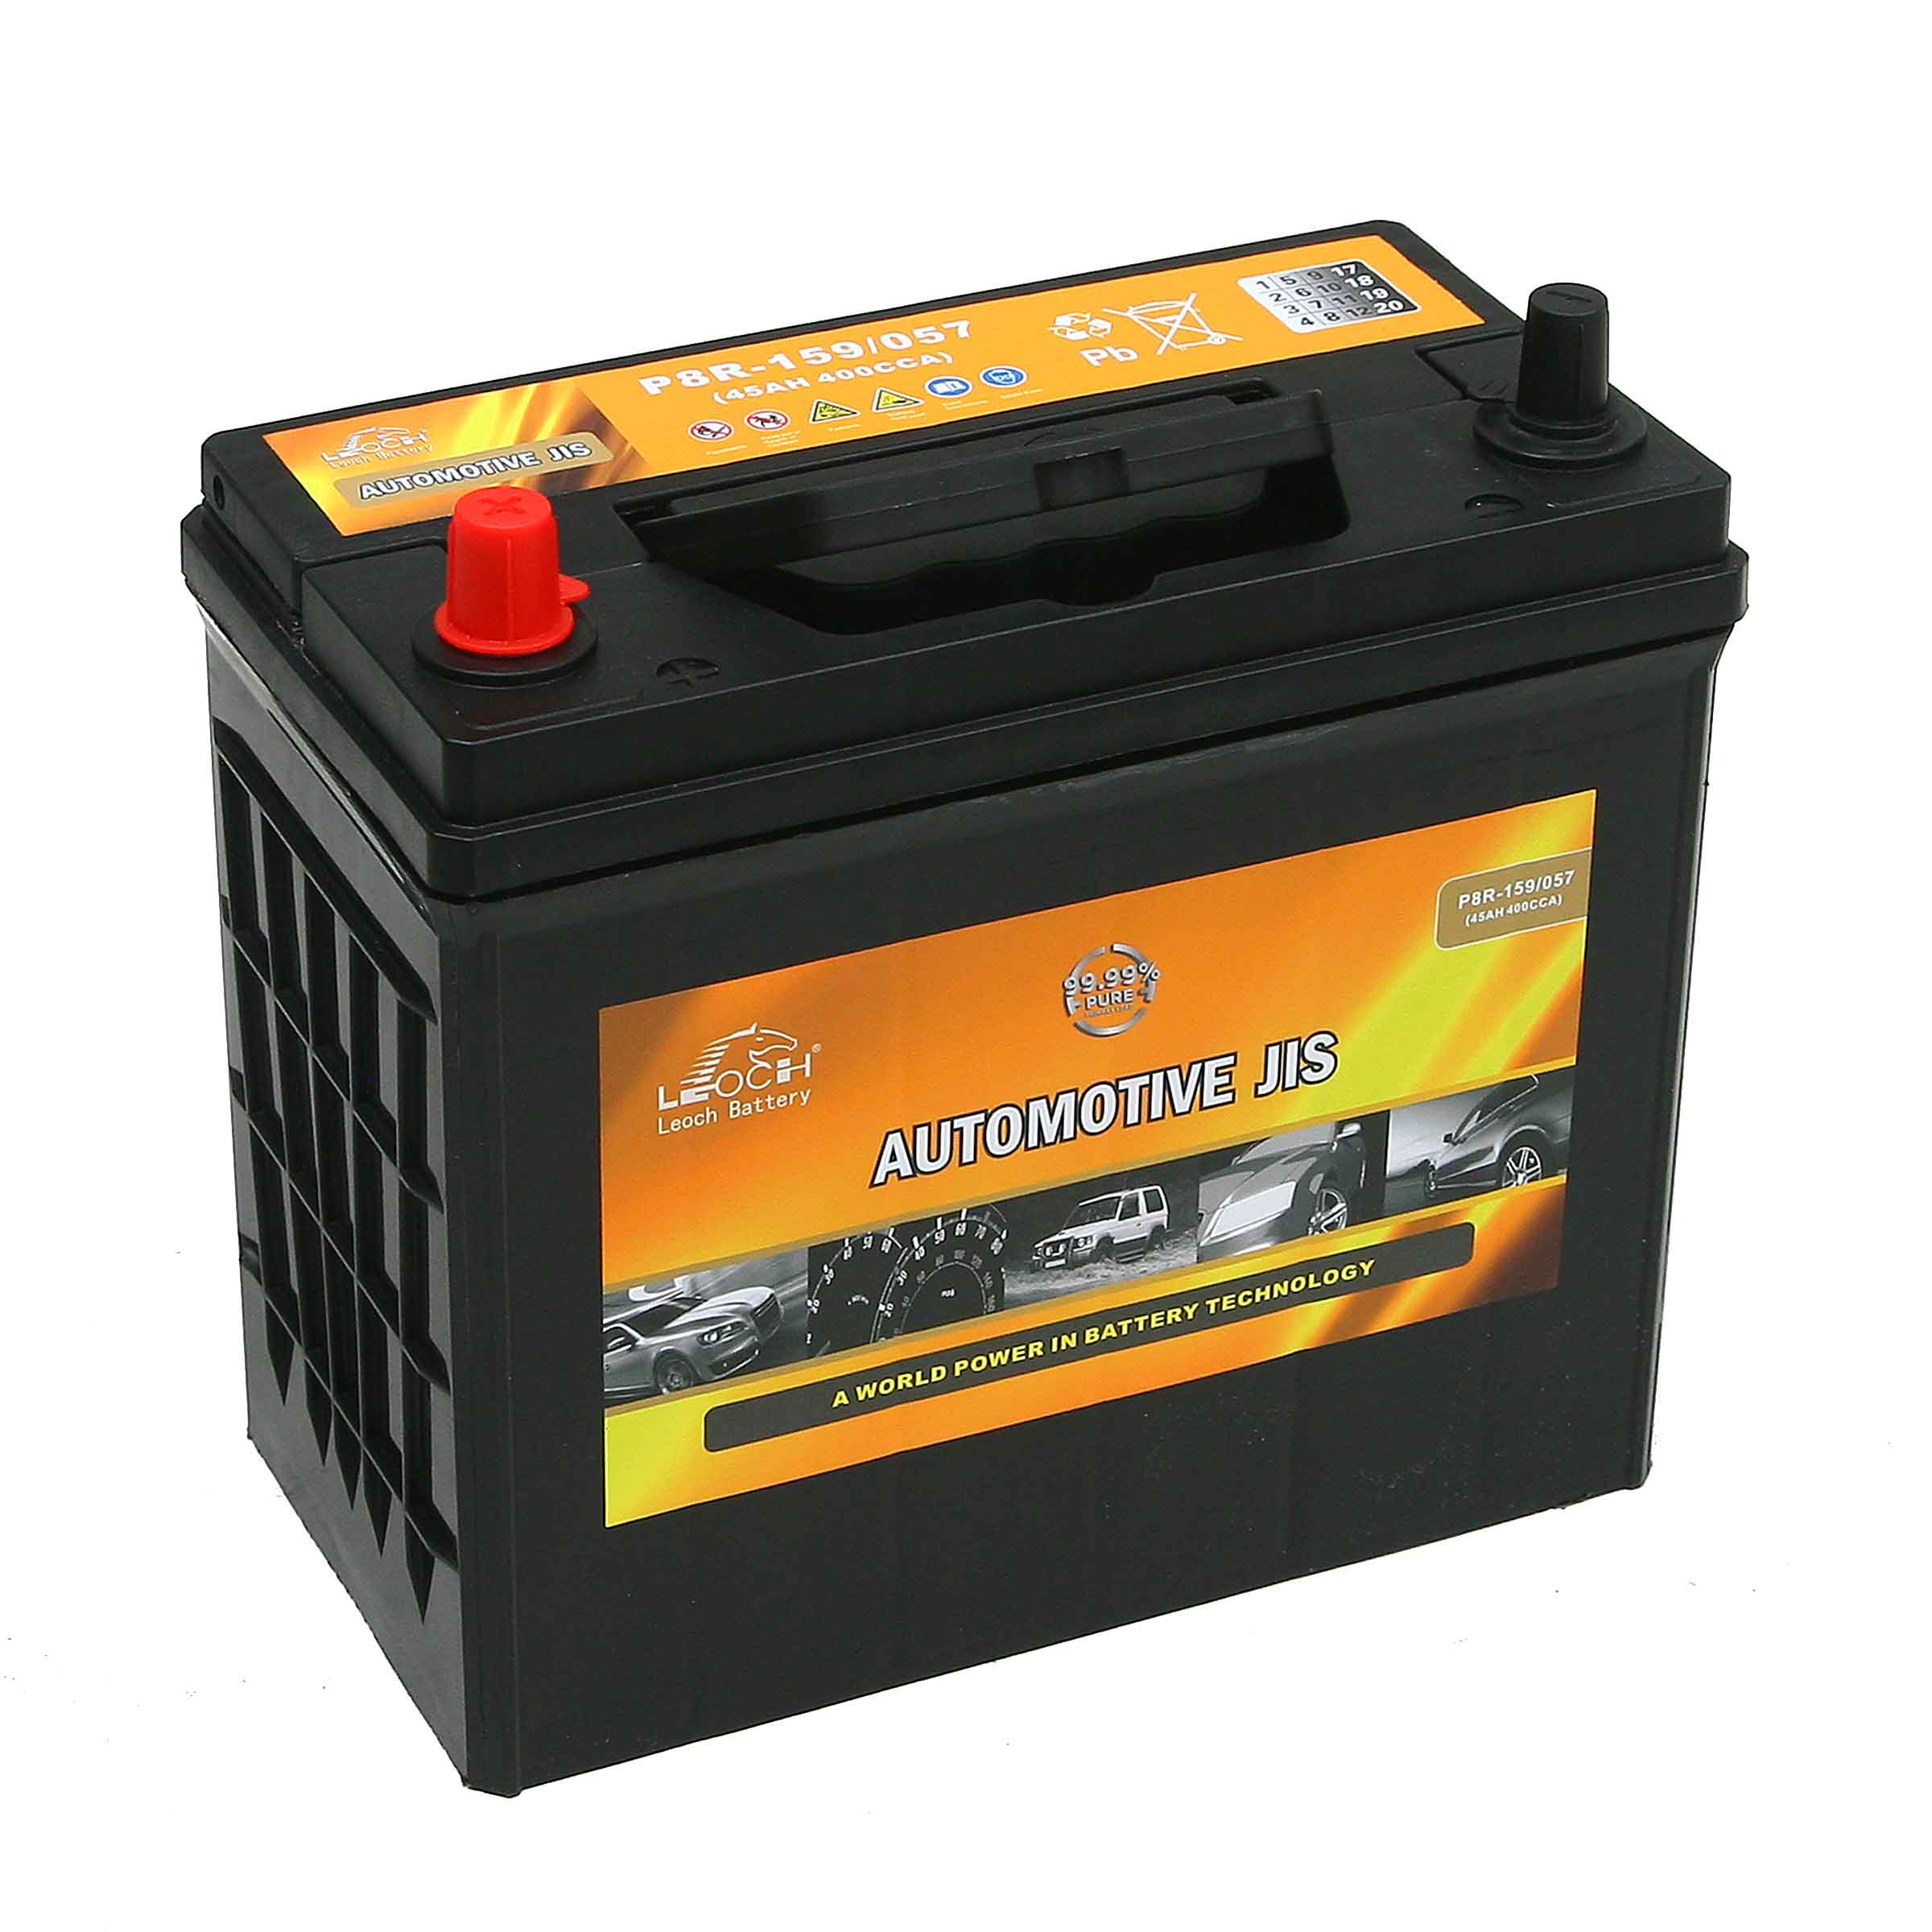 P8R-159 BATTERY